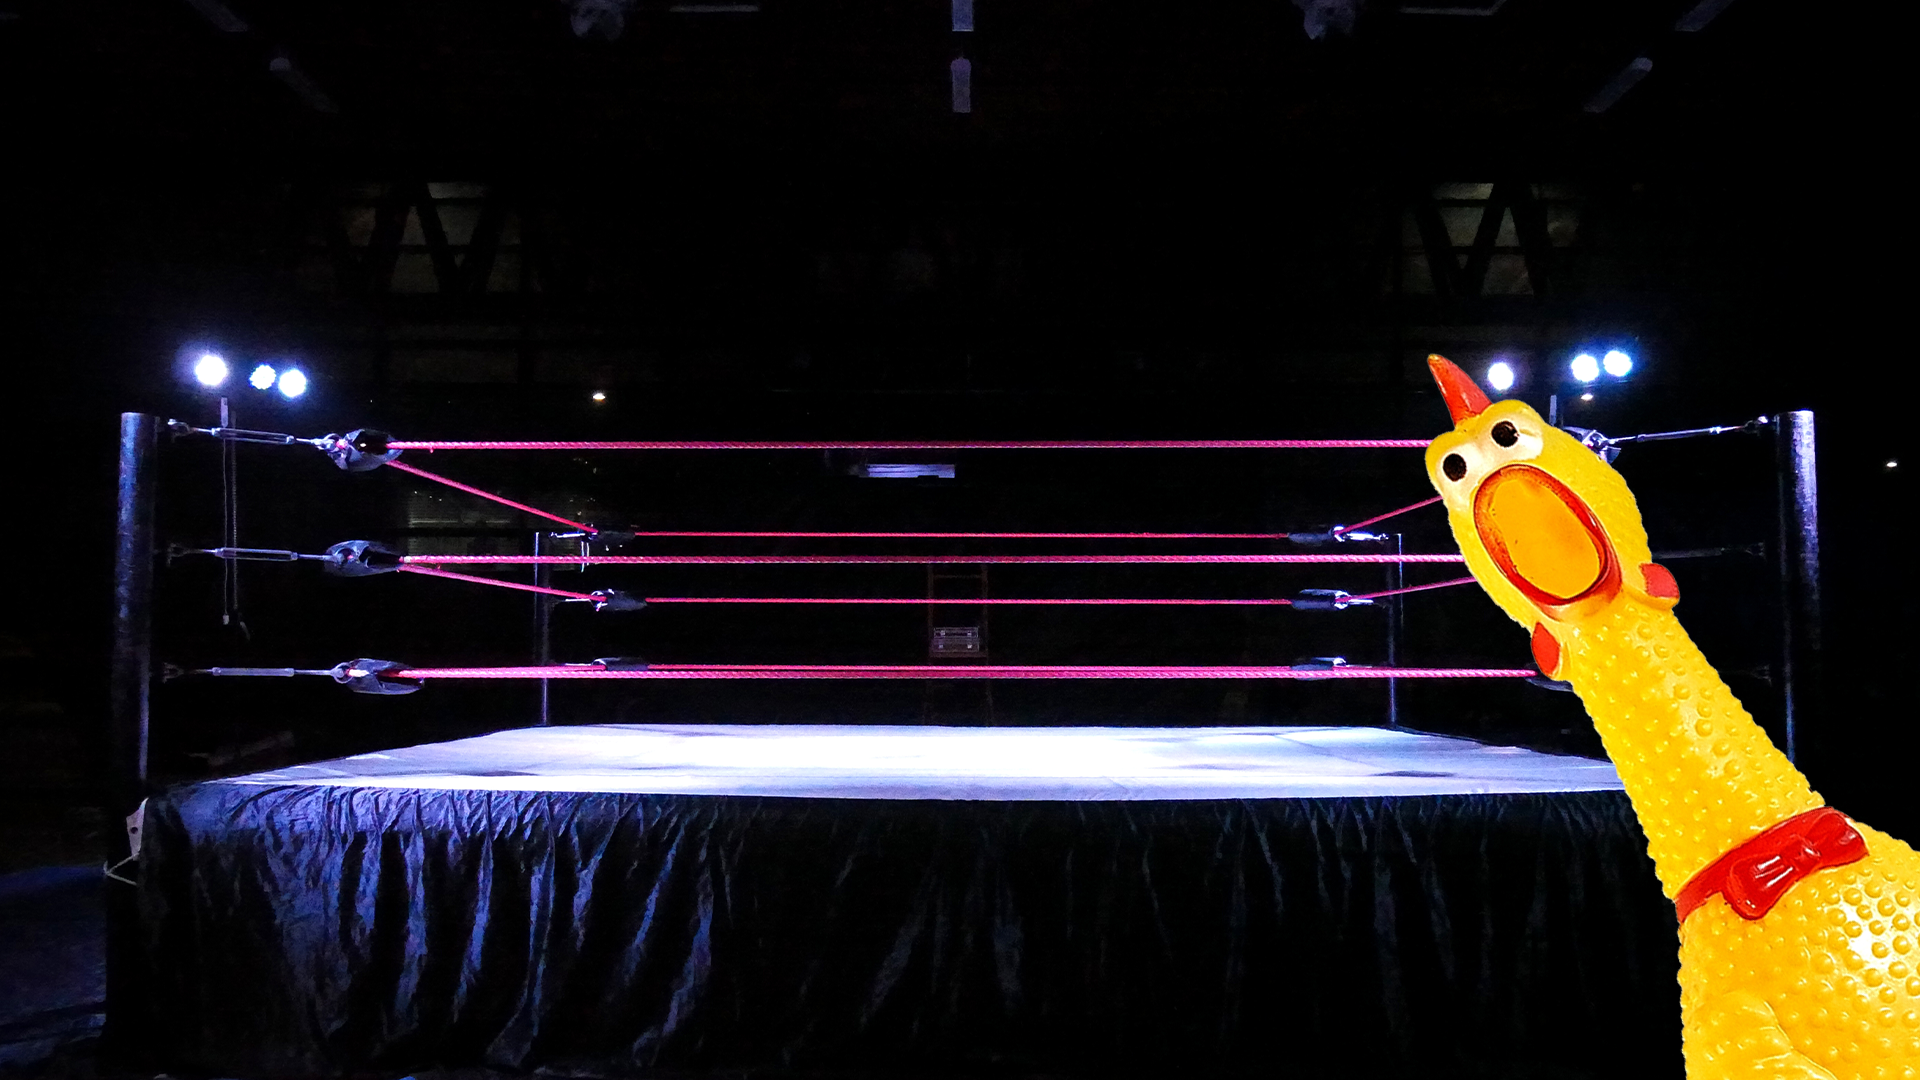 Wrestling ring with rubber chicken